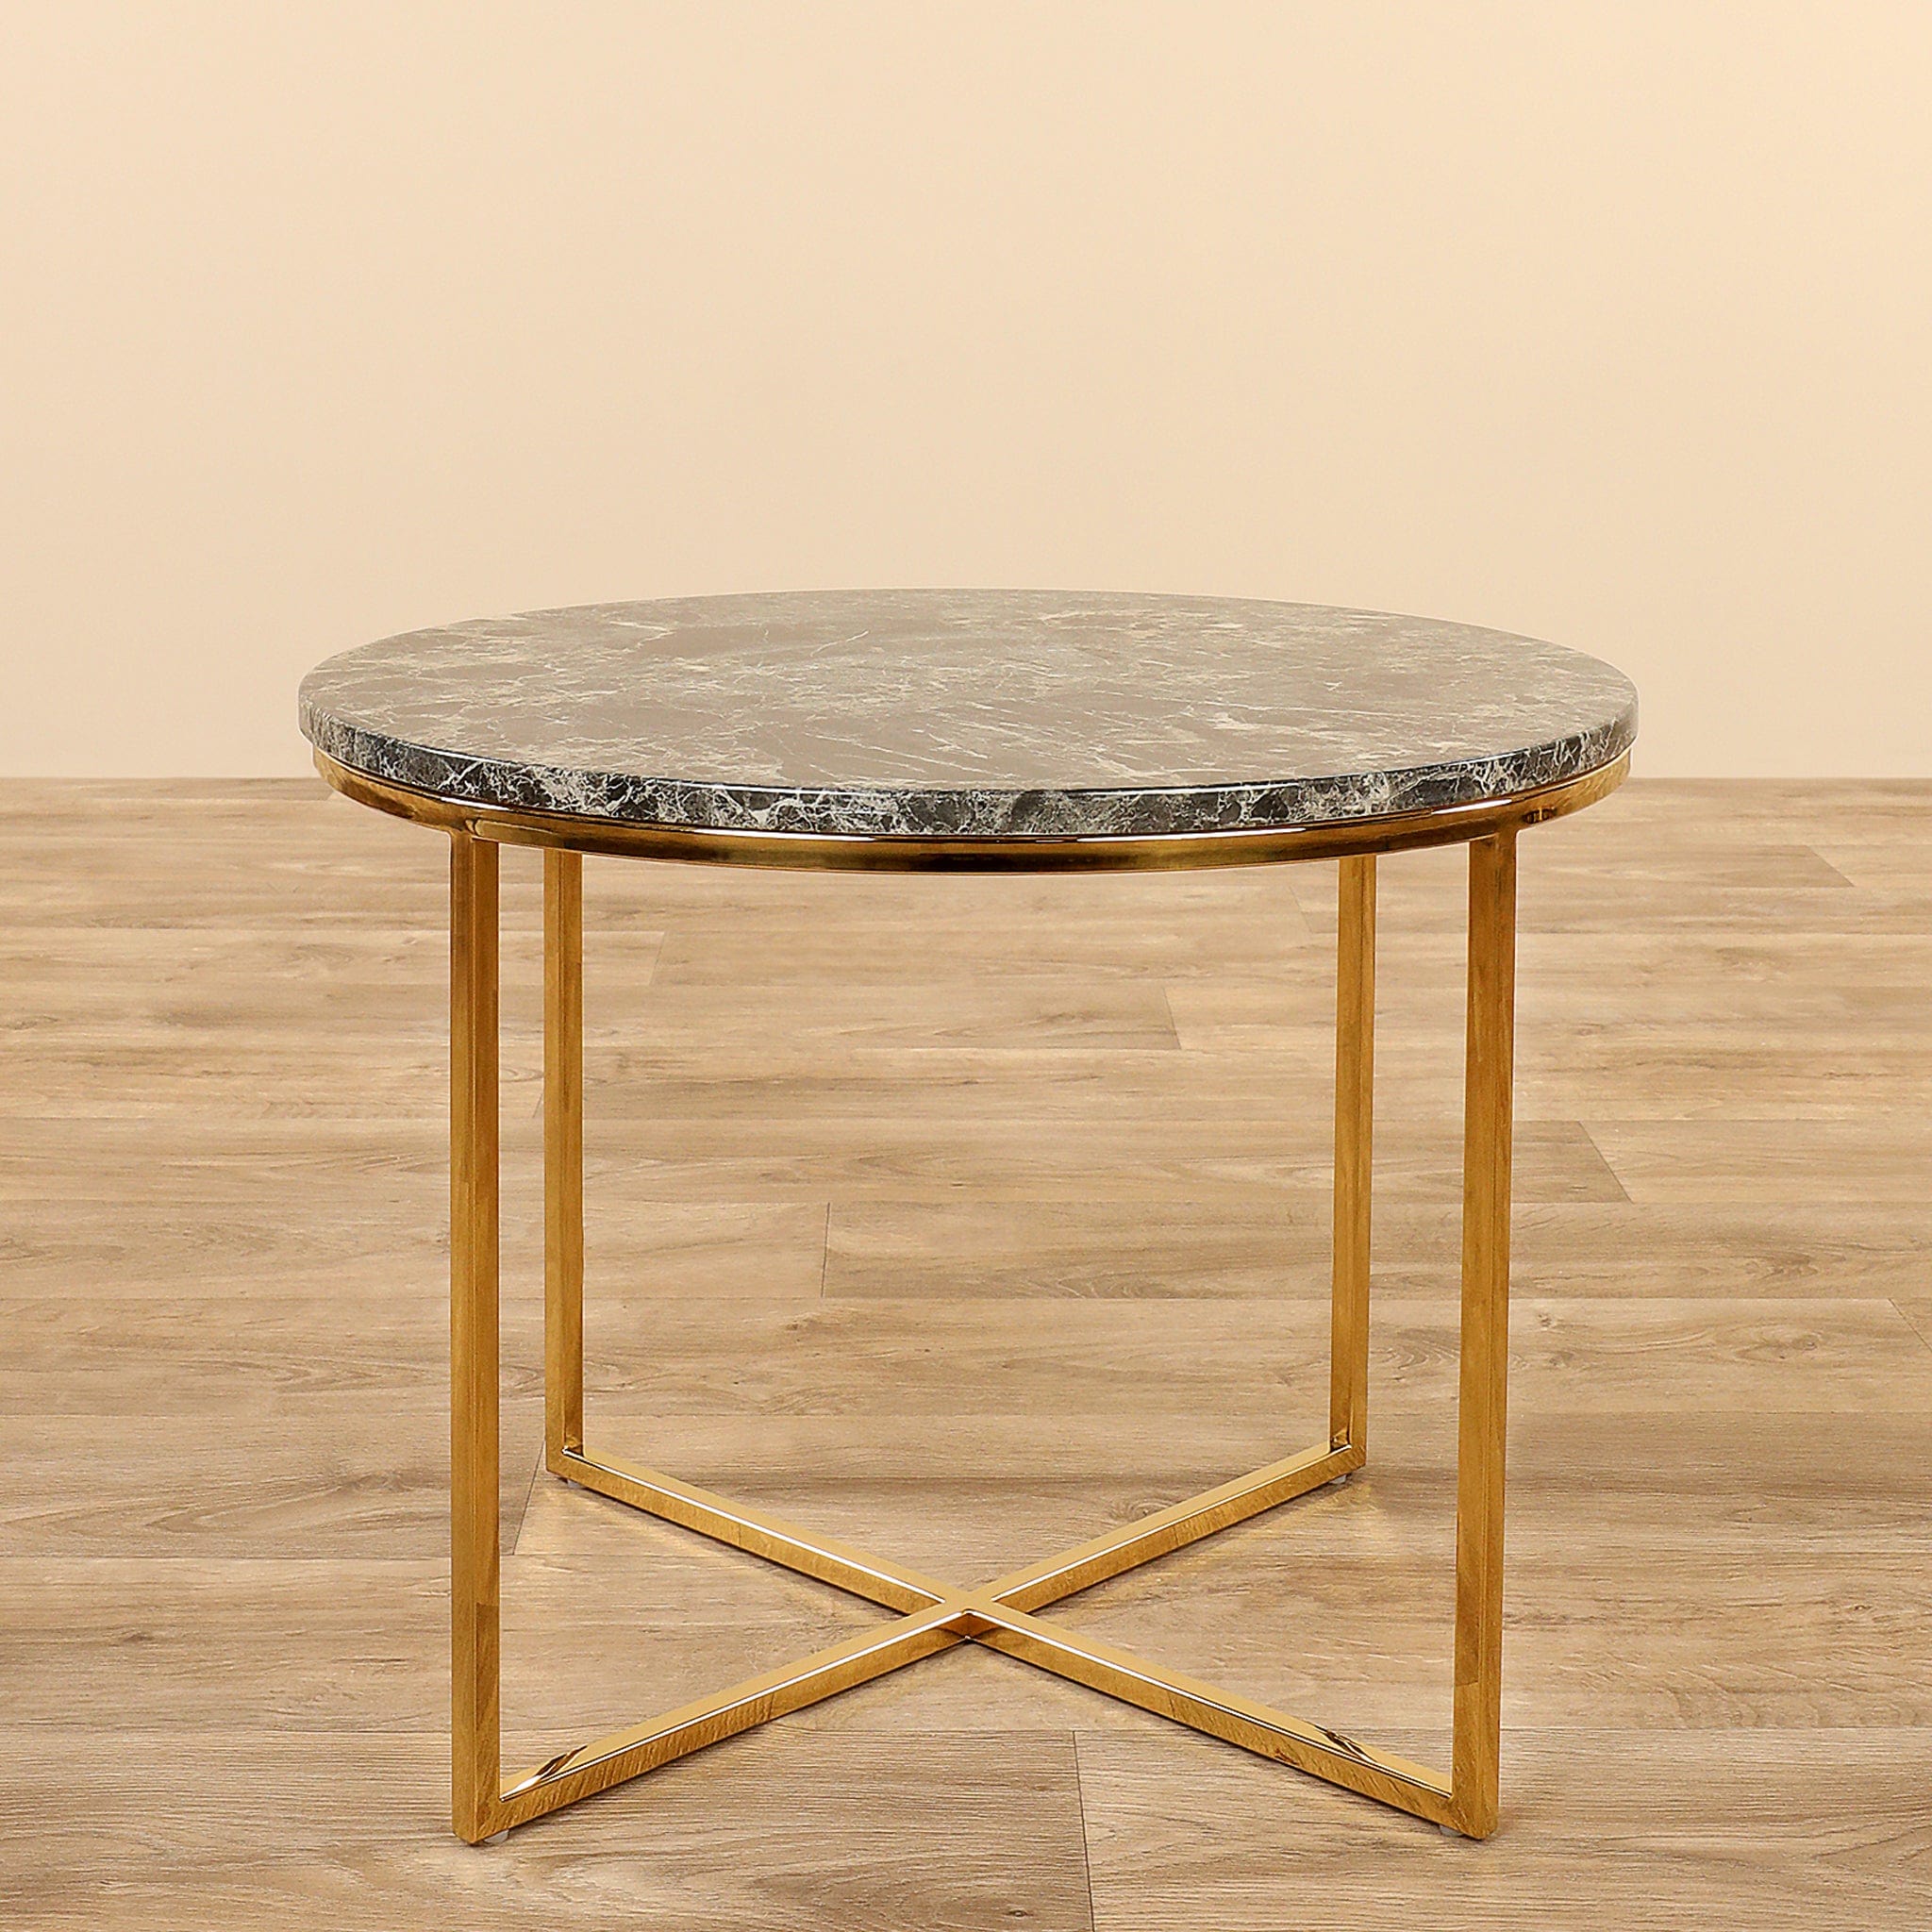 Cian<br>Marble Side Table - Bloomr